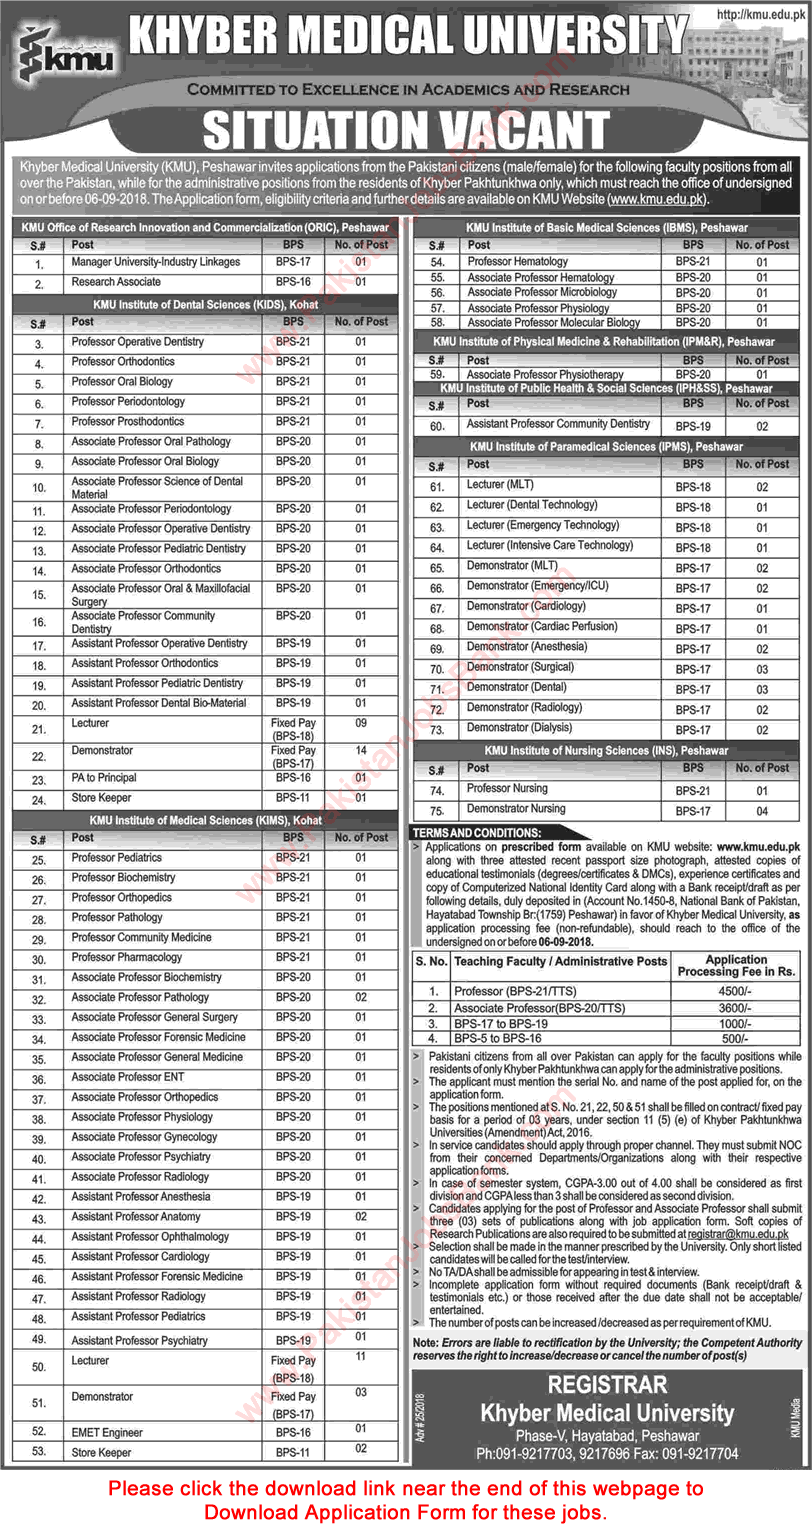 Khyber Medical University Peshawar Jobs 2018 August Application Form Teaching Faculty & Others Latest